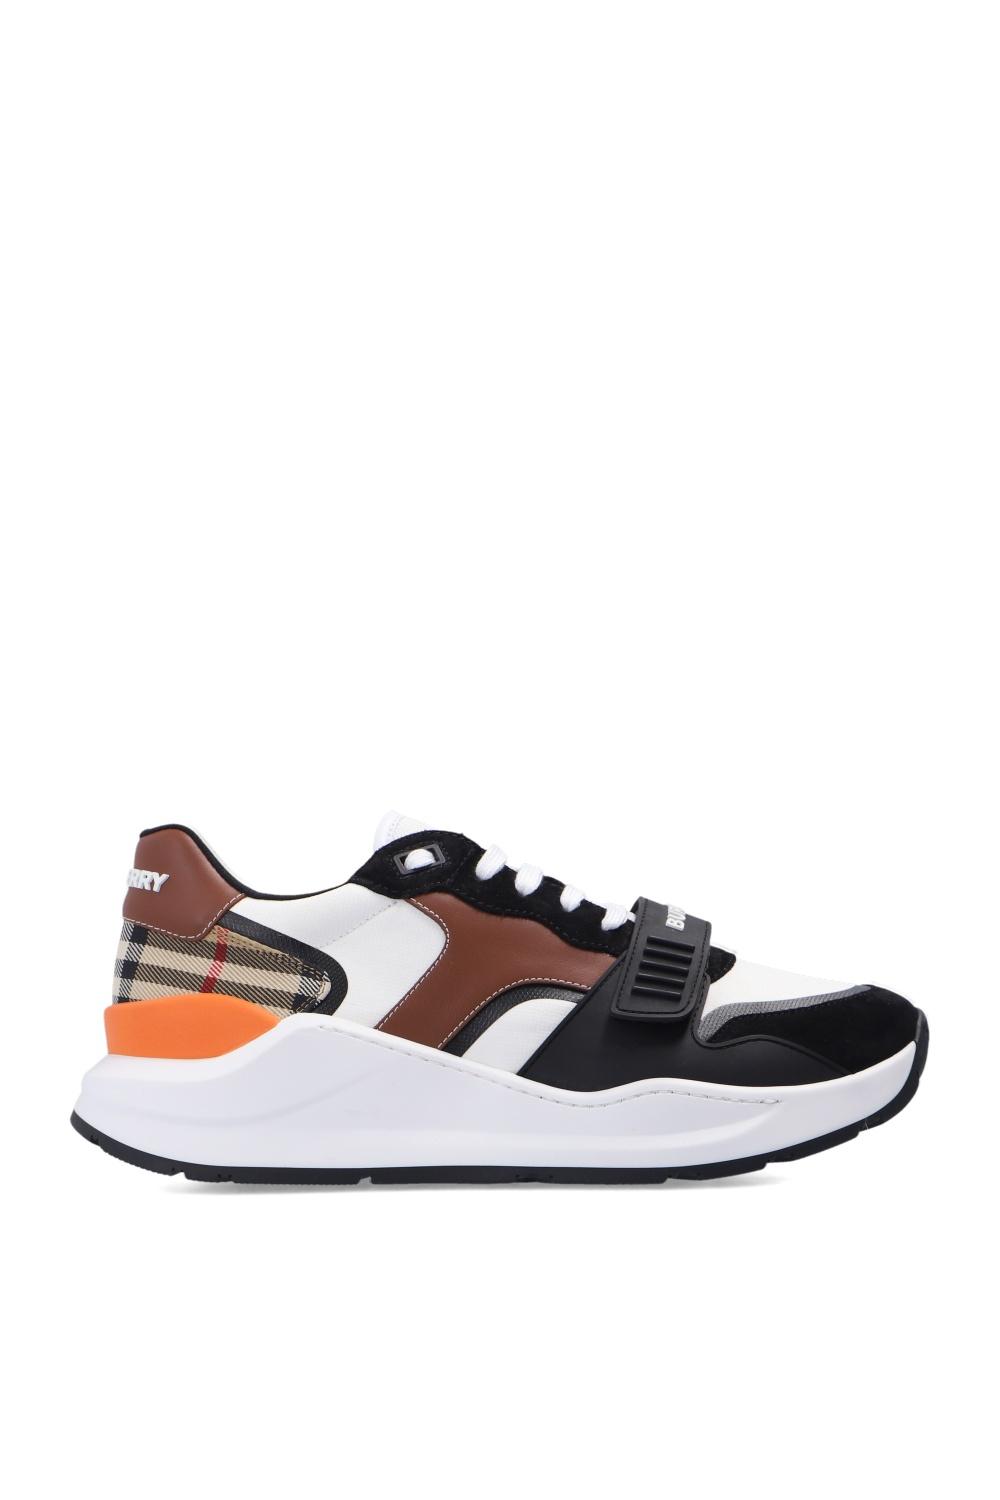 Burberry Leather 'ramsey' Sneakers for Men - Lyst